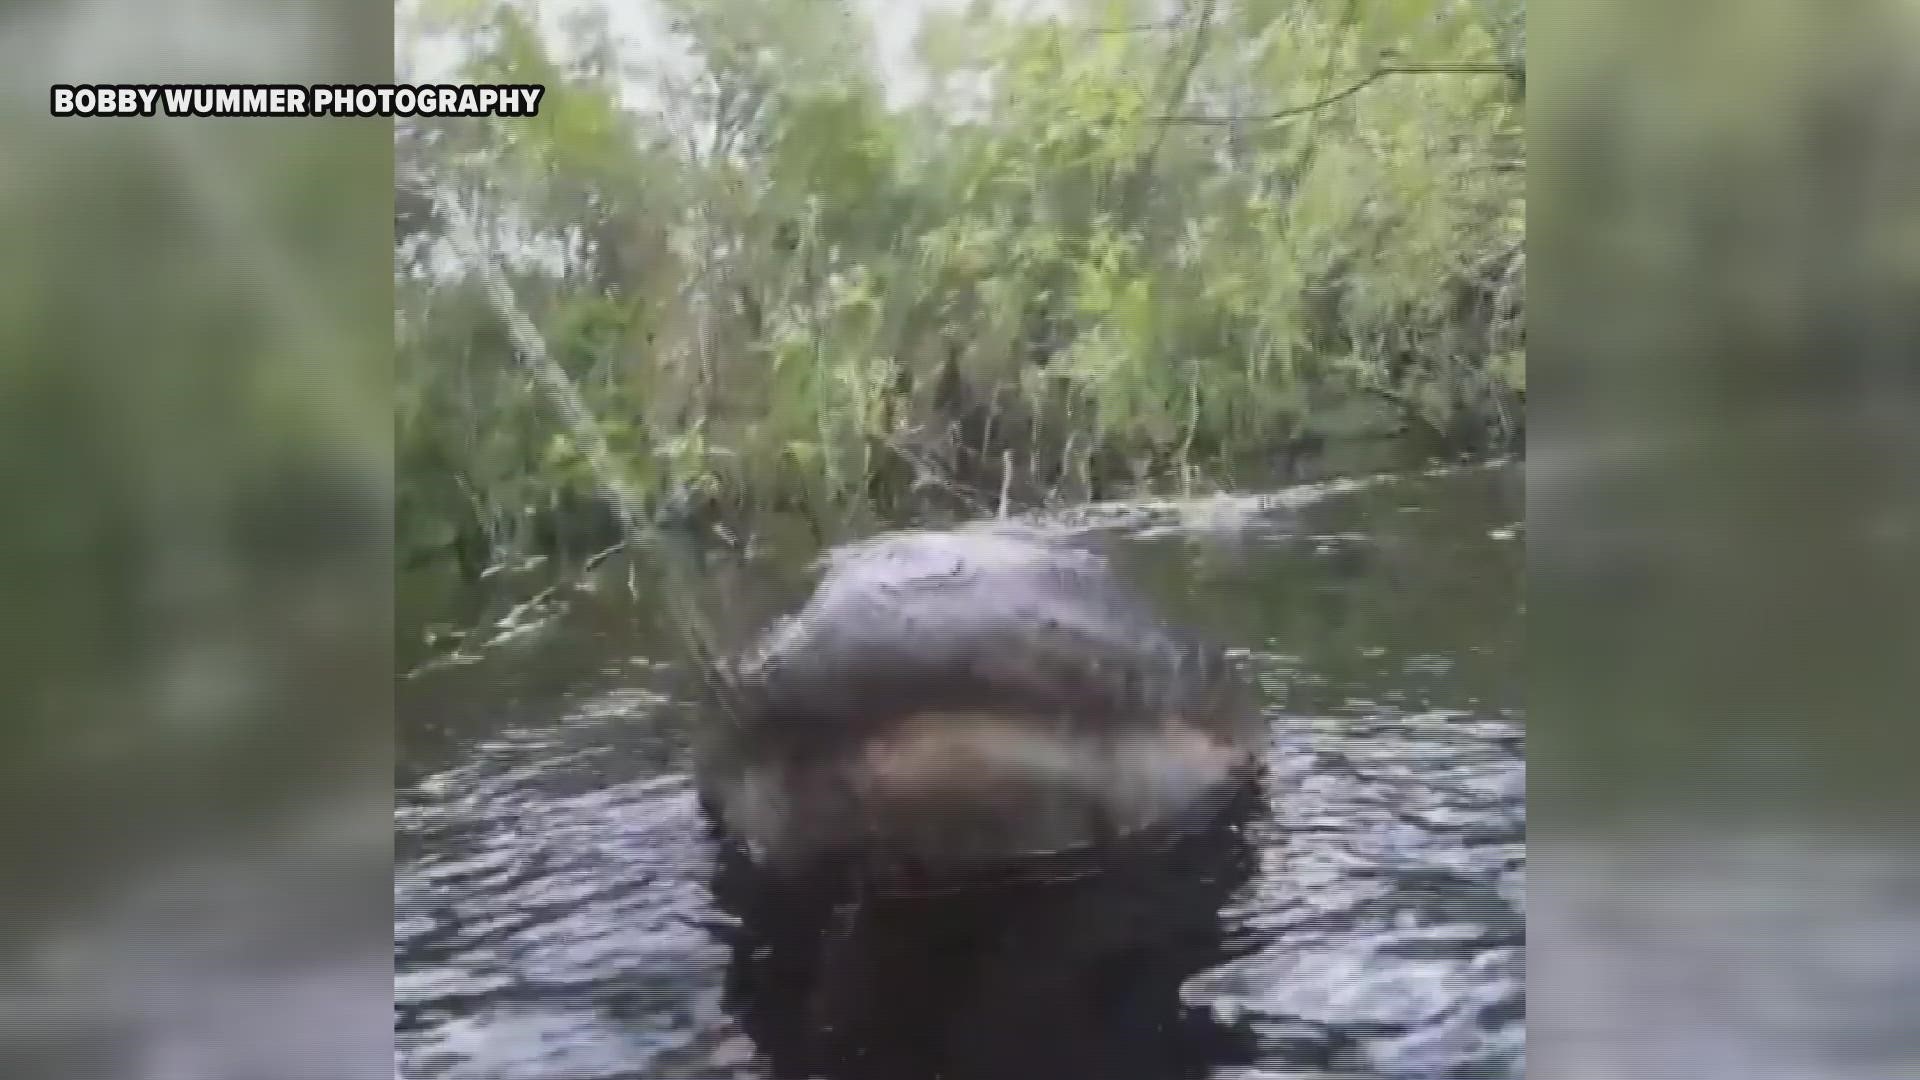 The photographer said he used a 12-foot extension pole to reach near the gator with the camera.